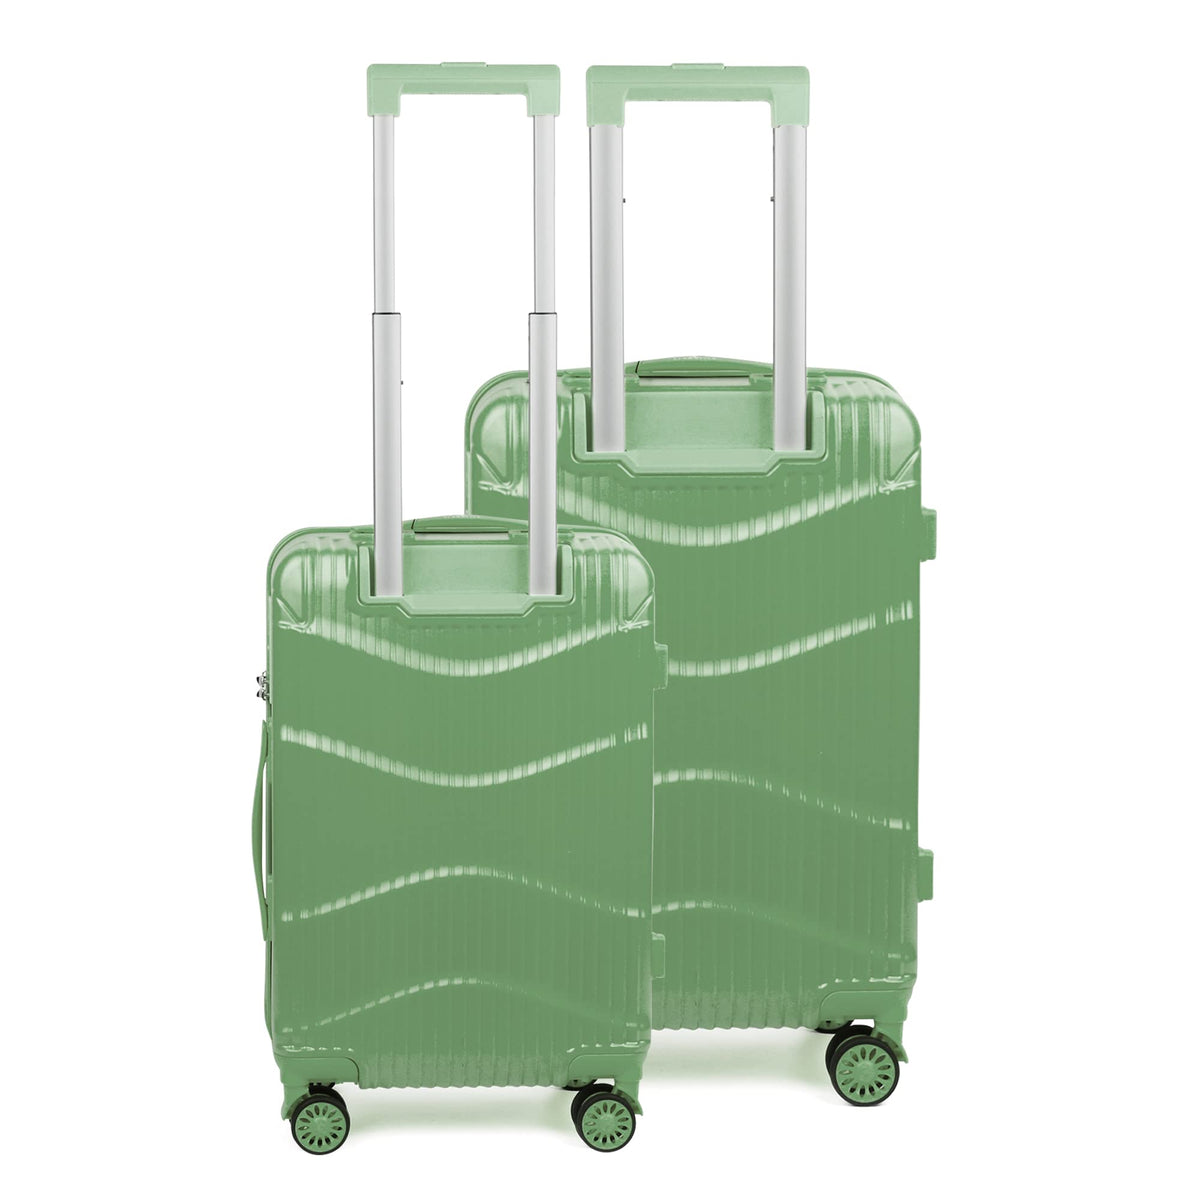 THE CLOWNFISH Combo of 2 Ballard Series Luggage ABS & Polycarbonate Exterior Suitcases Eight Wheel Trolley Bags with TSA Lock-Green (Medium 65 cm-26 inch, Small 55 cm-22 inch)